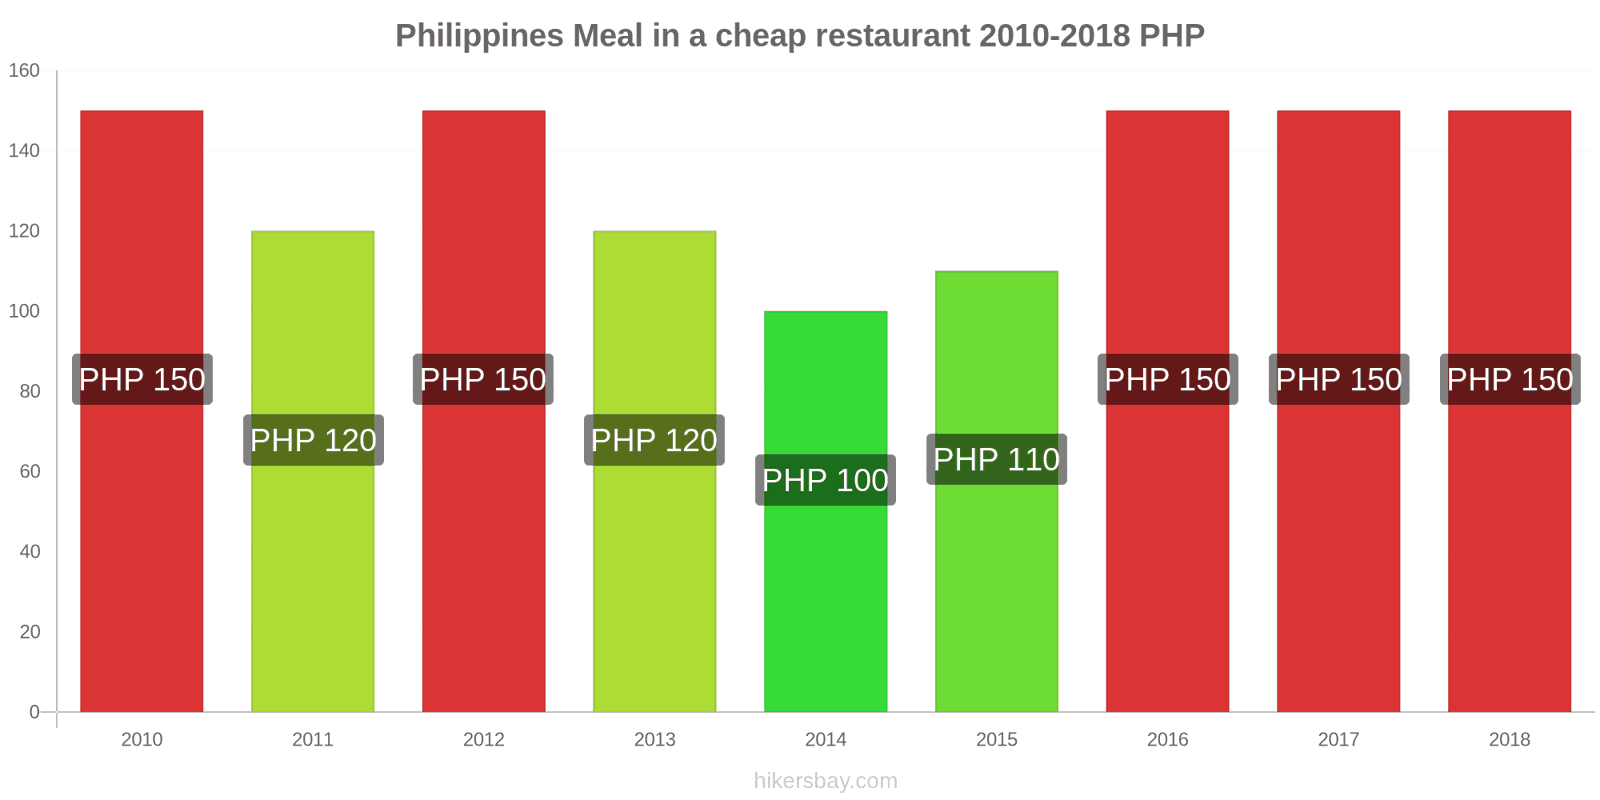 Philippines price changes Meal in a cheap restaurant hikersbay.com